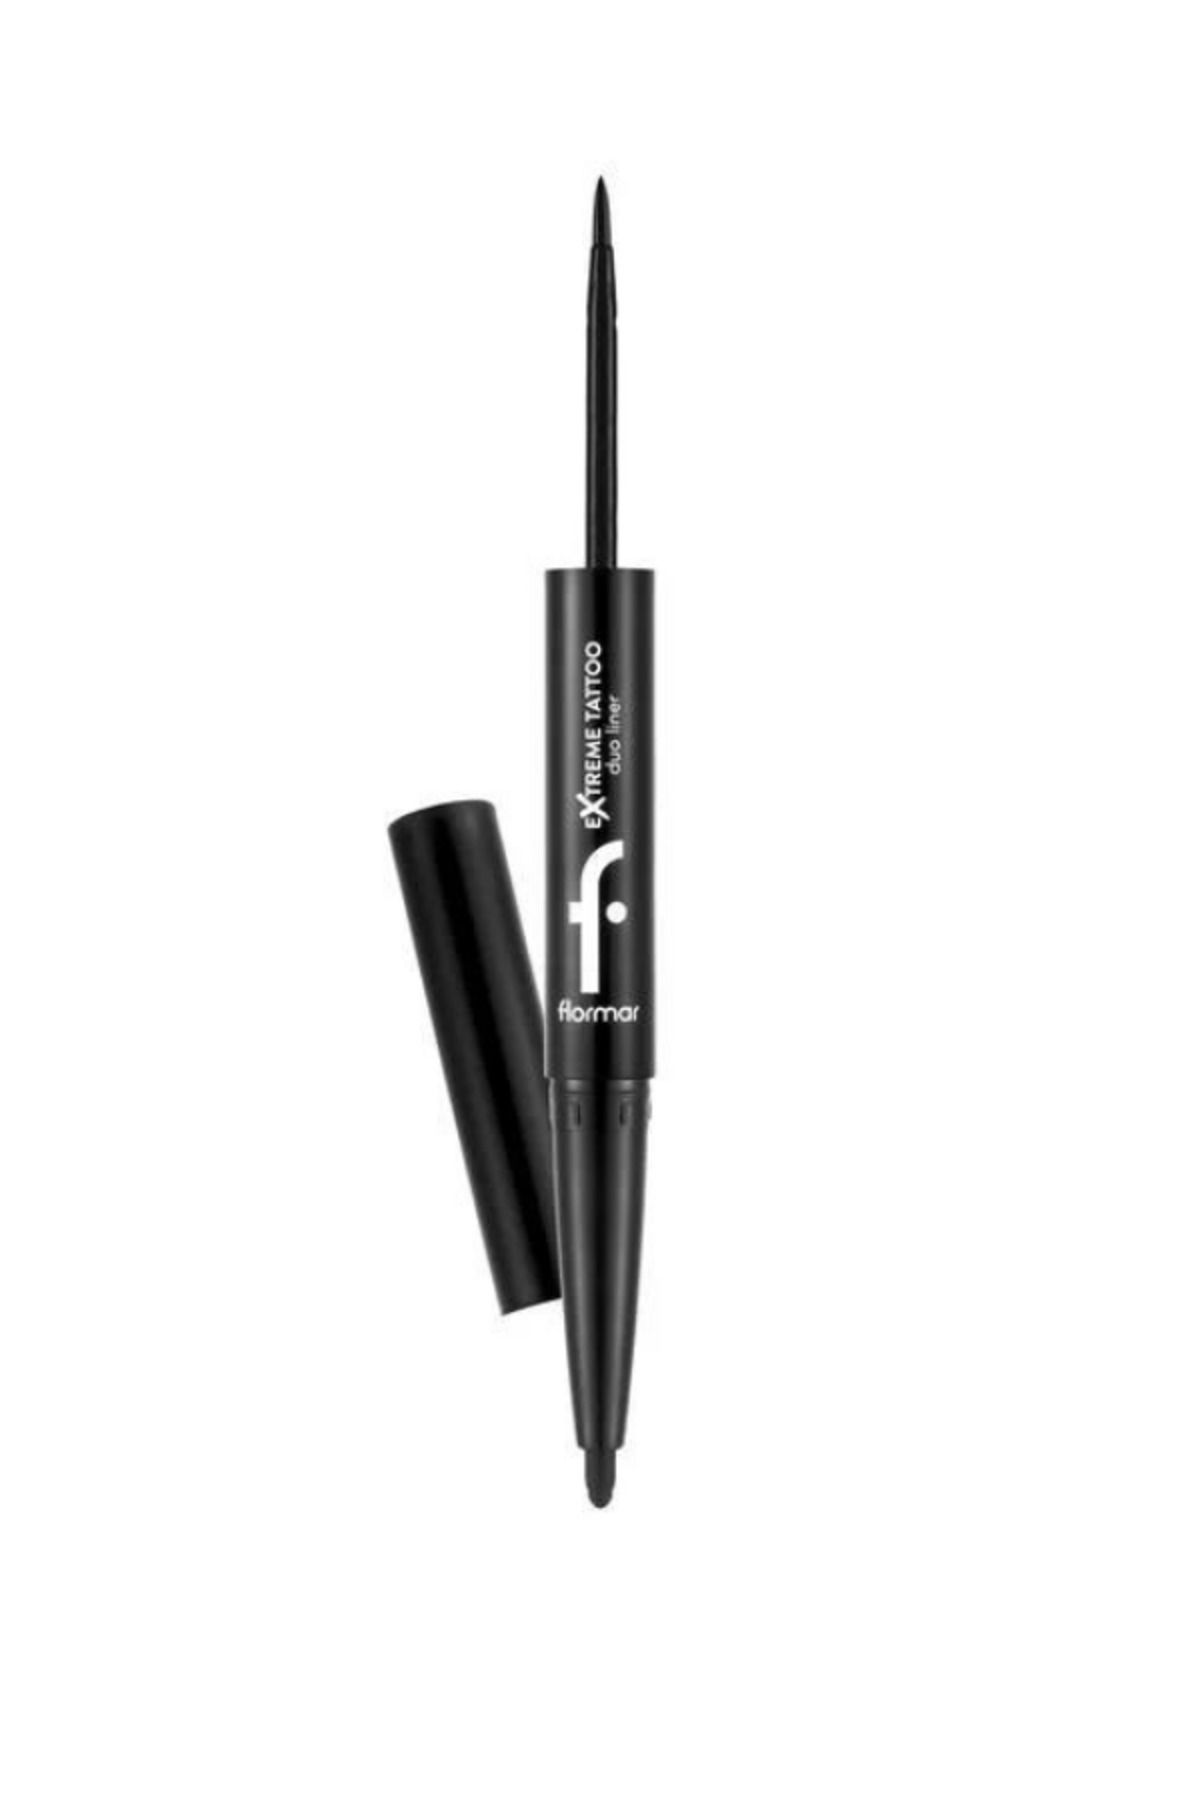 Flormar NEW DOUBLE SİDED EYELİNER & EYE PENCİL | 2.66 G - 001 BLACK PSSN2238